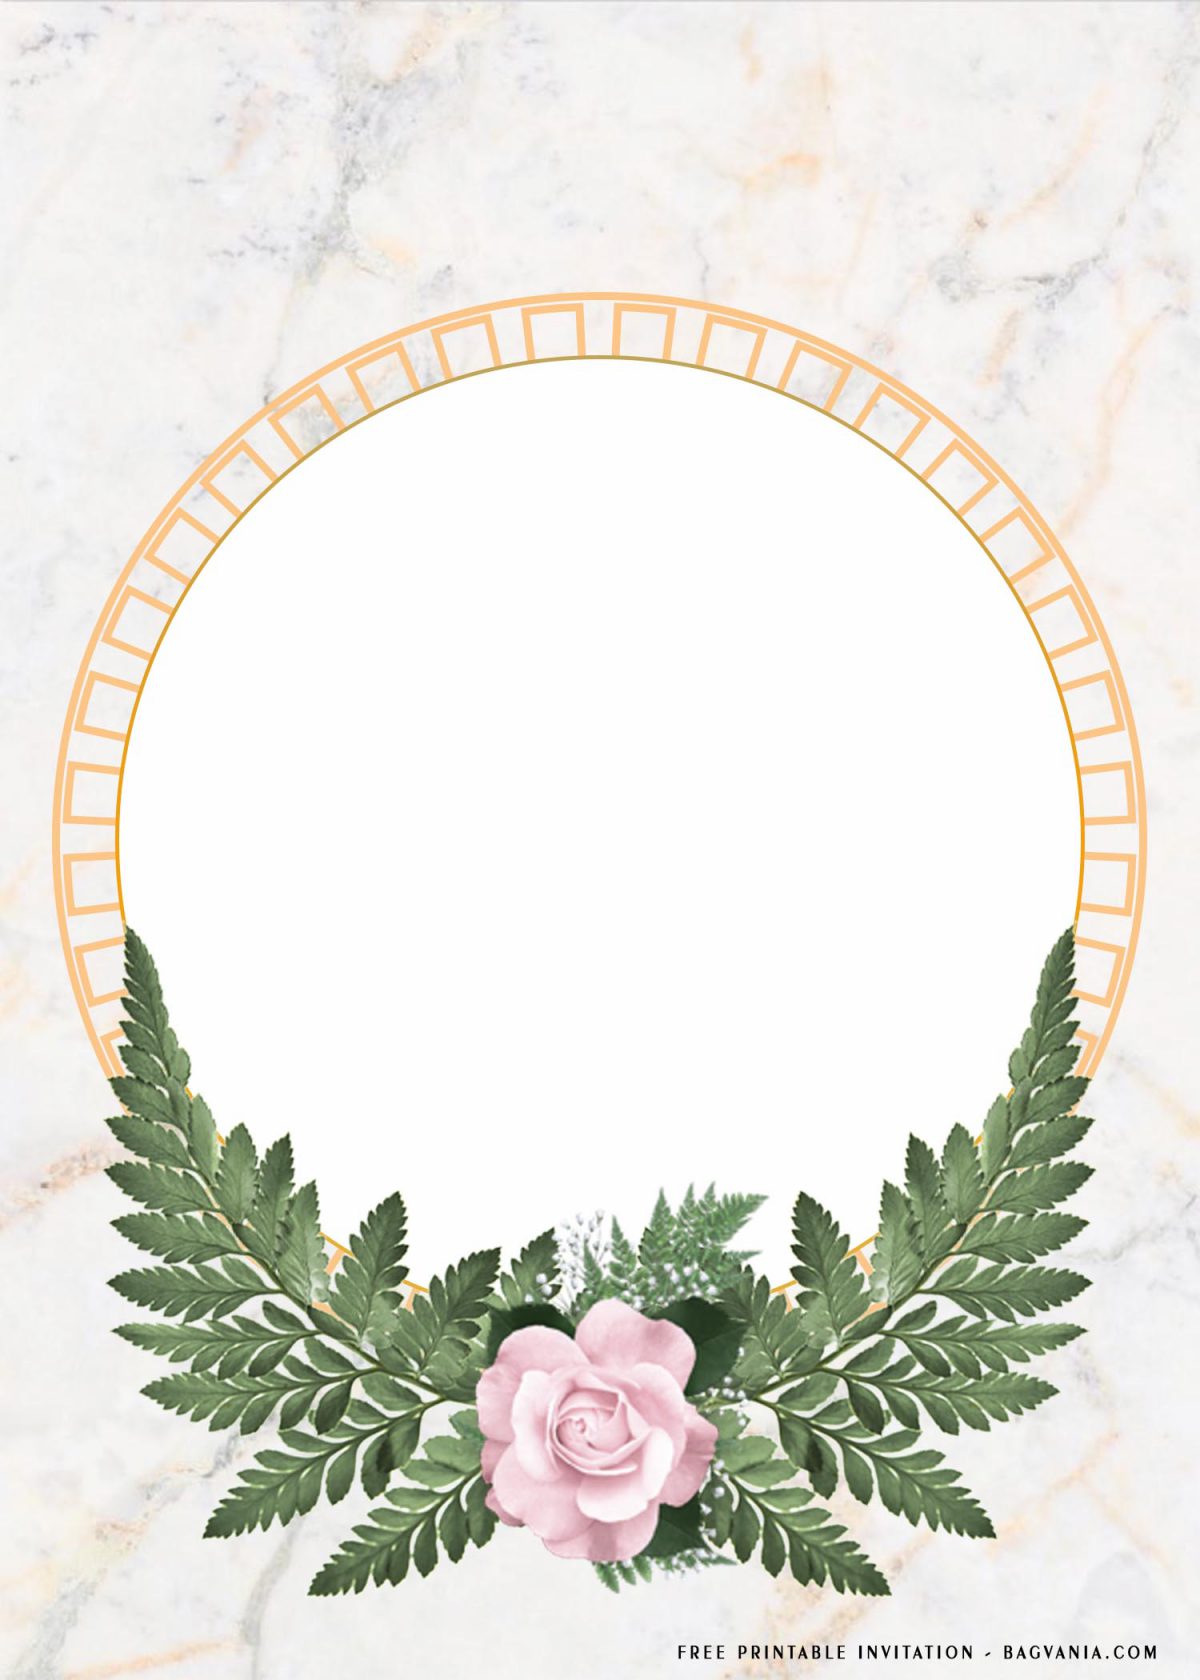 Free Printable Round Golden Frame Birthday Invitation Templates With Green Fern On Its Frame